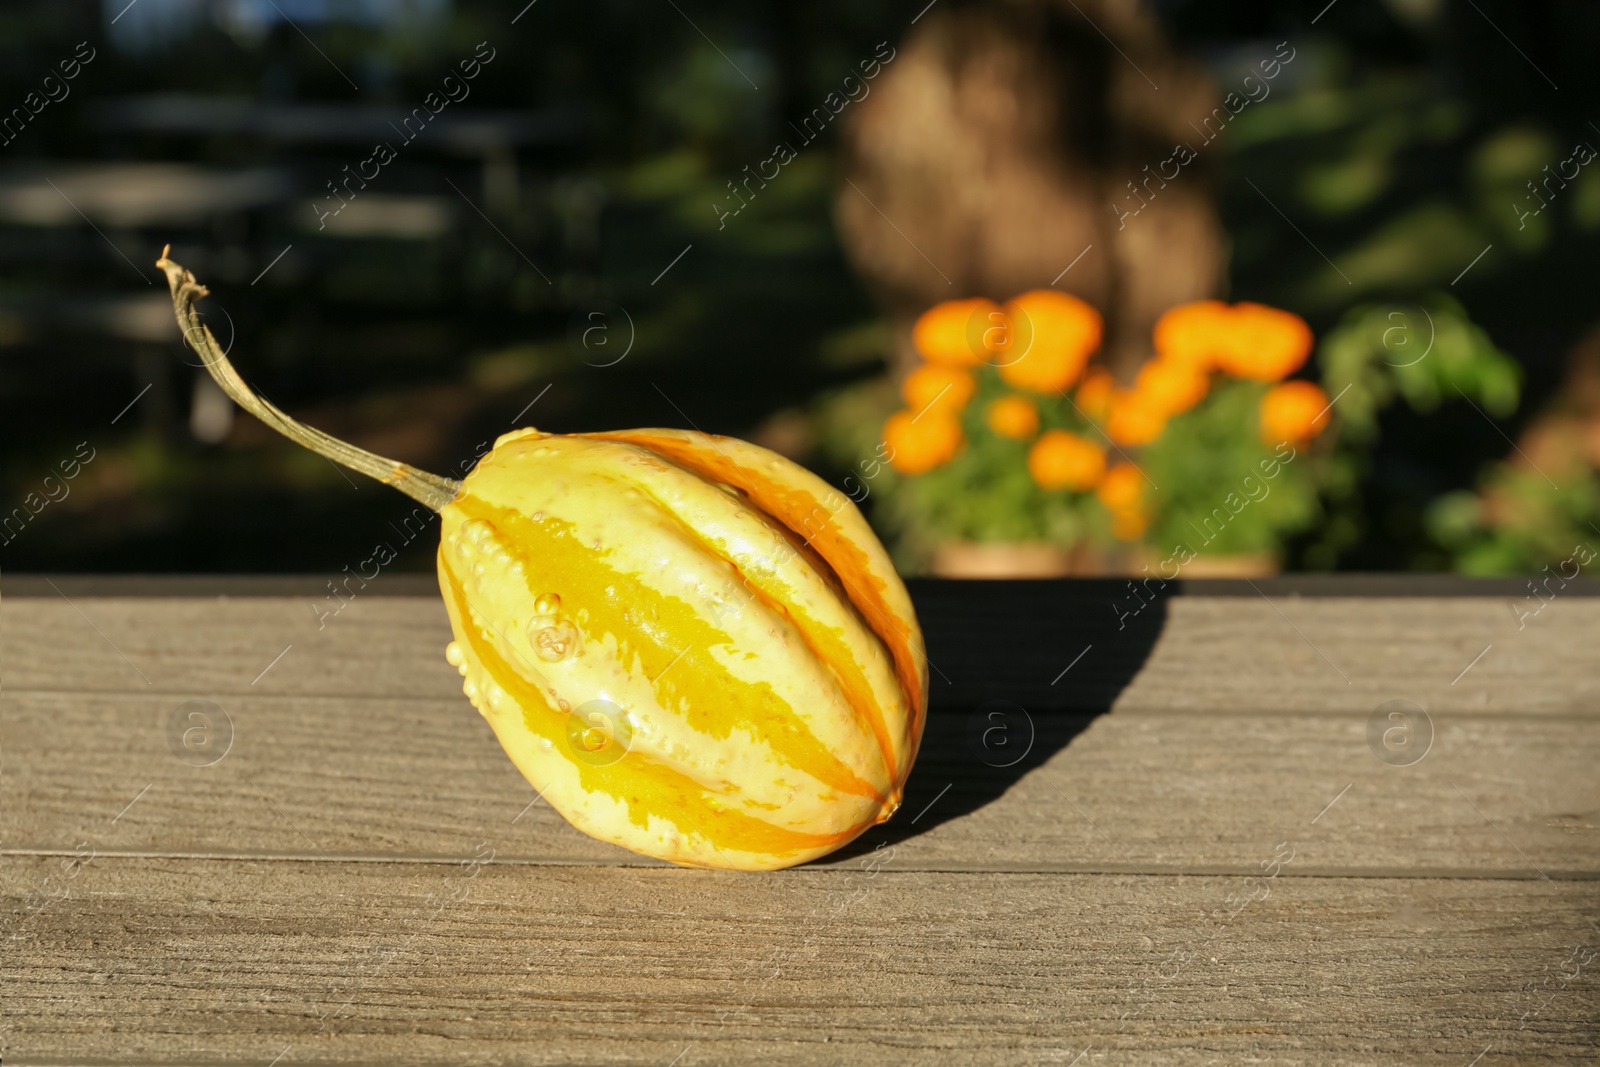 Photo of Whole ripe pumpkin on wooden table outdoors